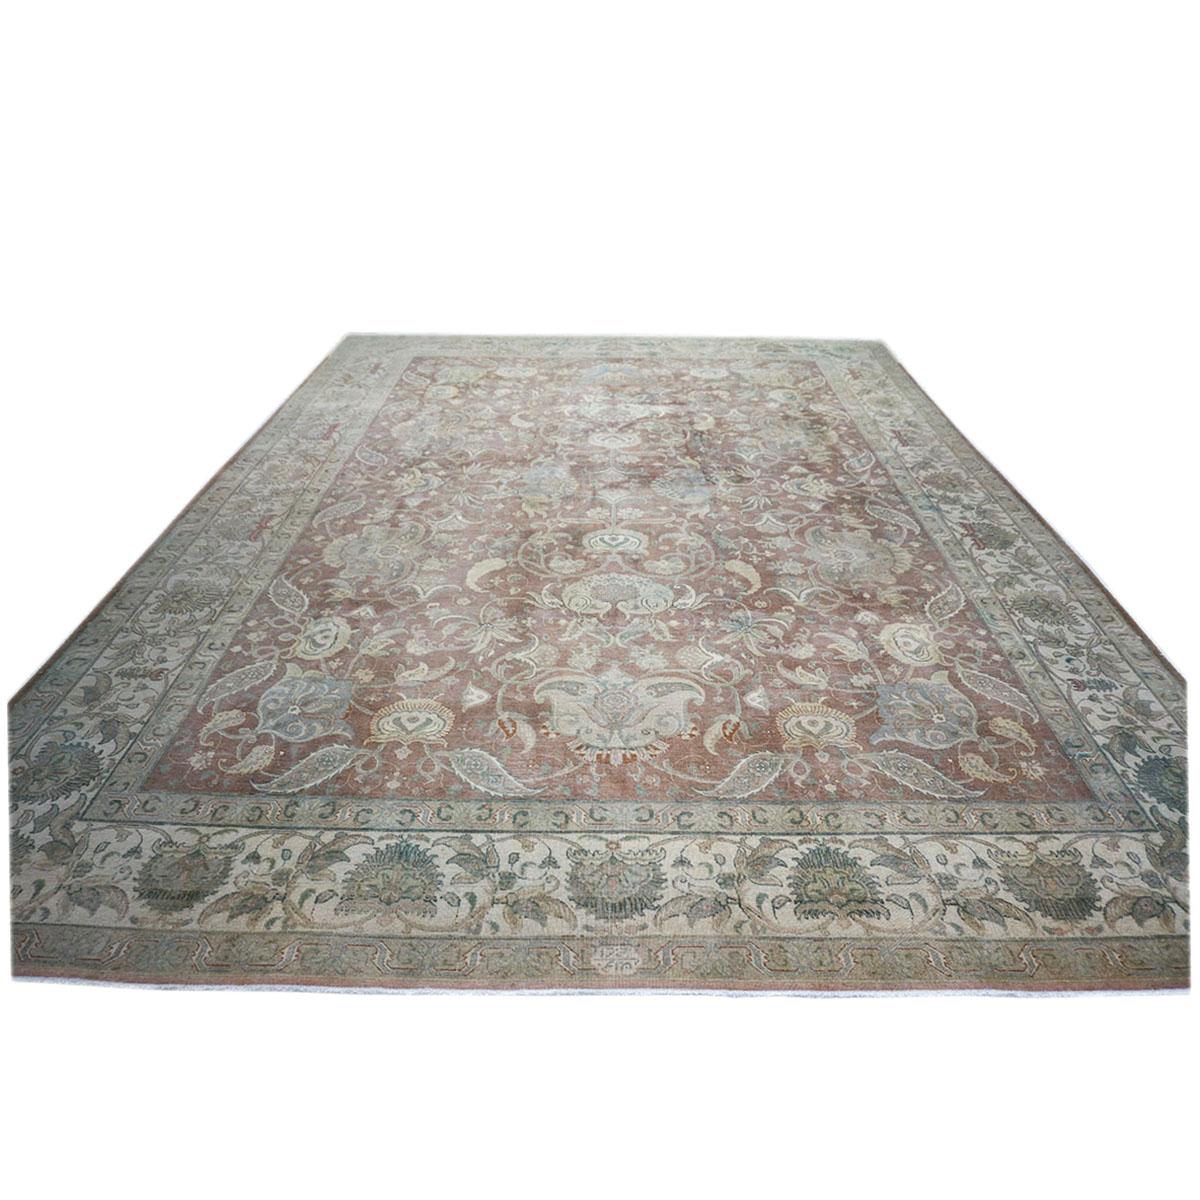 Ashly Fine Rugs presents a 1910 Antique Distressed Persian Tabriz 10 x 14 brown, green, and ivory handmade area rug. Tabriz is a northern city in modern-day Iran and has forever been famous for the fineness of its handmade rugs. This rug has a